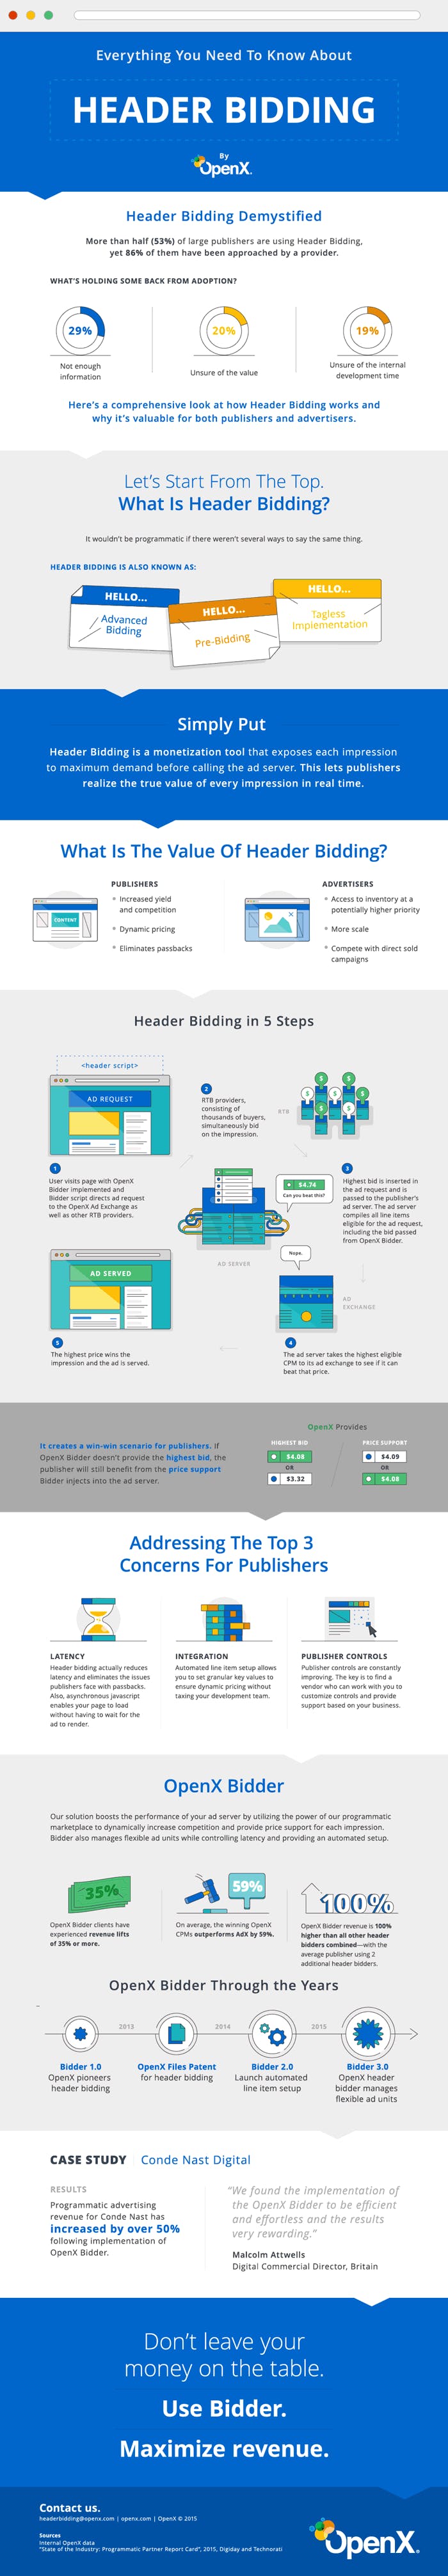 2015 11 25 Header Bidding Infographic - Everything You Need to Know About Header Bidding: Animated Infographic